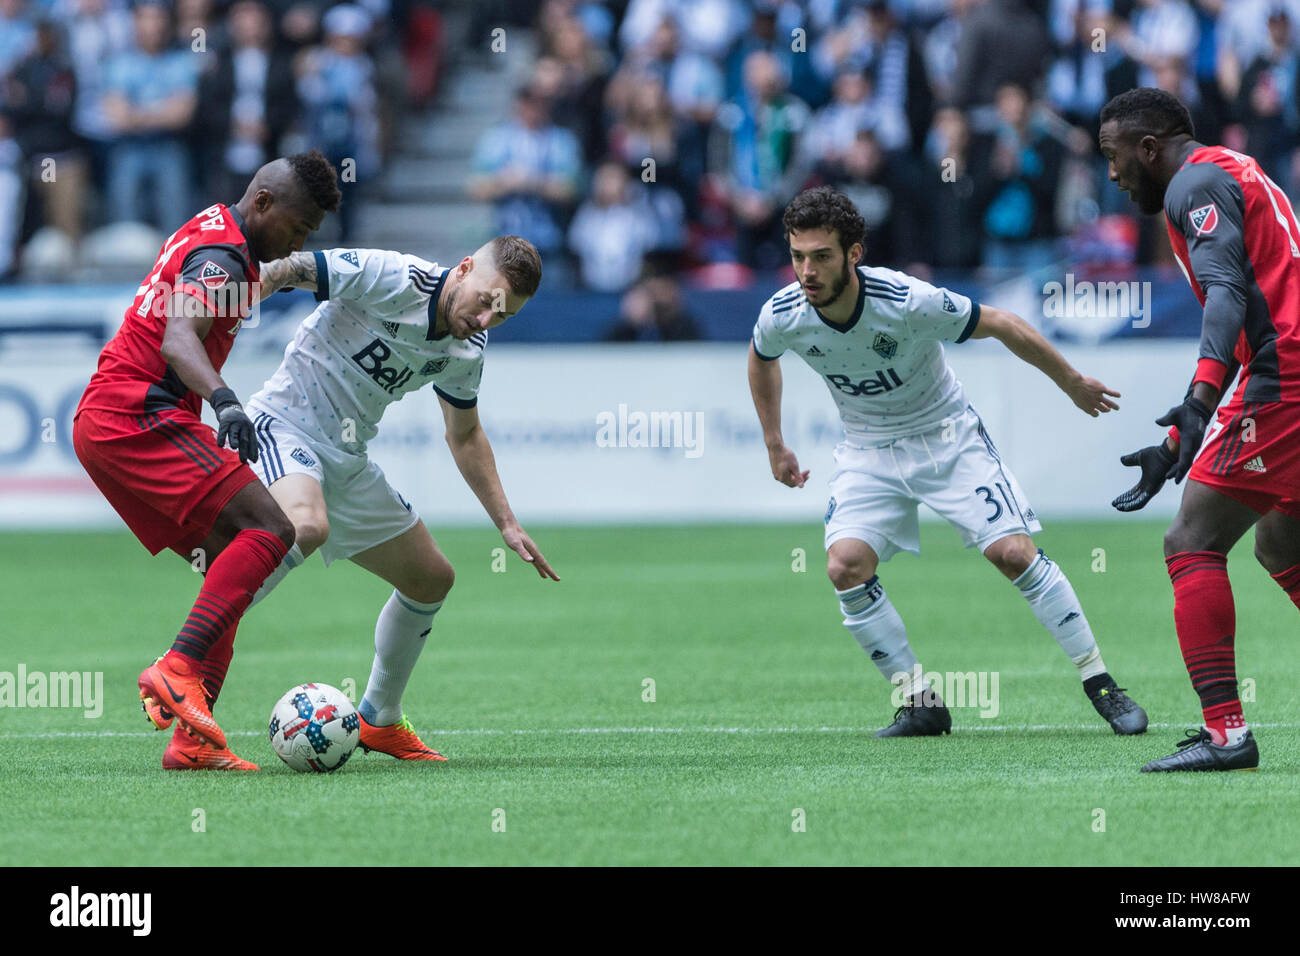 Vancouver, Canada. 18 March, 2017. Jordan Harvey #2 of Vancouver Whitecaps challenging  Armando Cooper #31 of Toronto FC. Vancouver Whitecaps vs Toronto FC, BC Place Stadium. Toronto defeats Vancouver 2-0, with goals from Victor Vasquez #7 and Jozy Altidore #17 of Toronto FC  © Gerry Rousseau/Alamy Live News Stock Photo